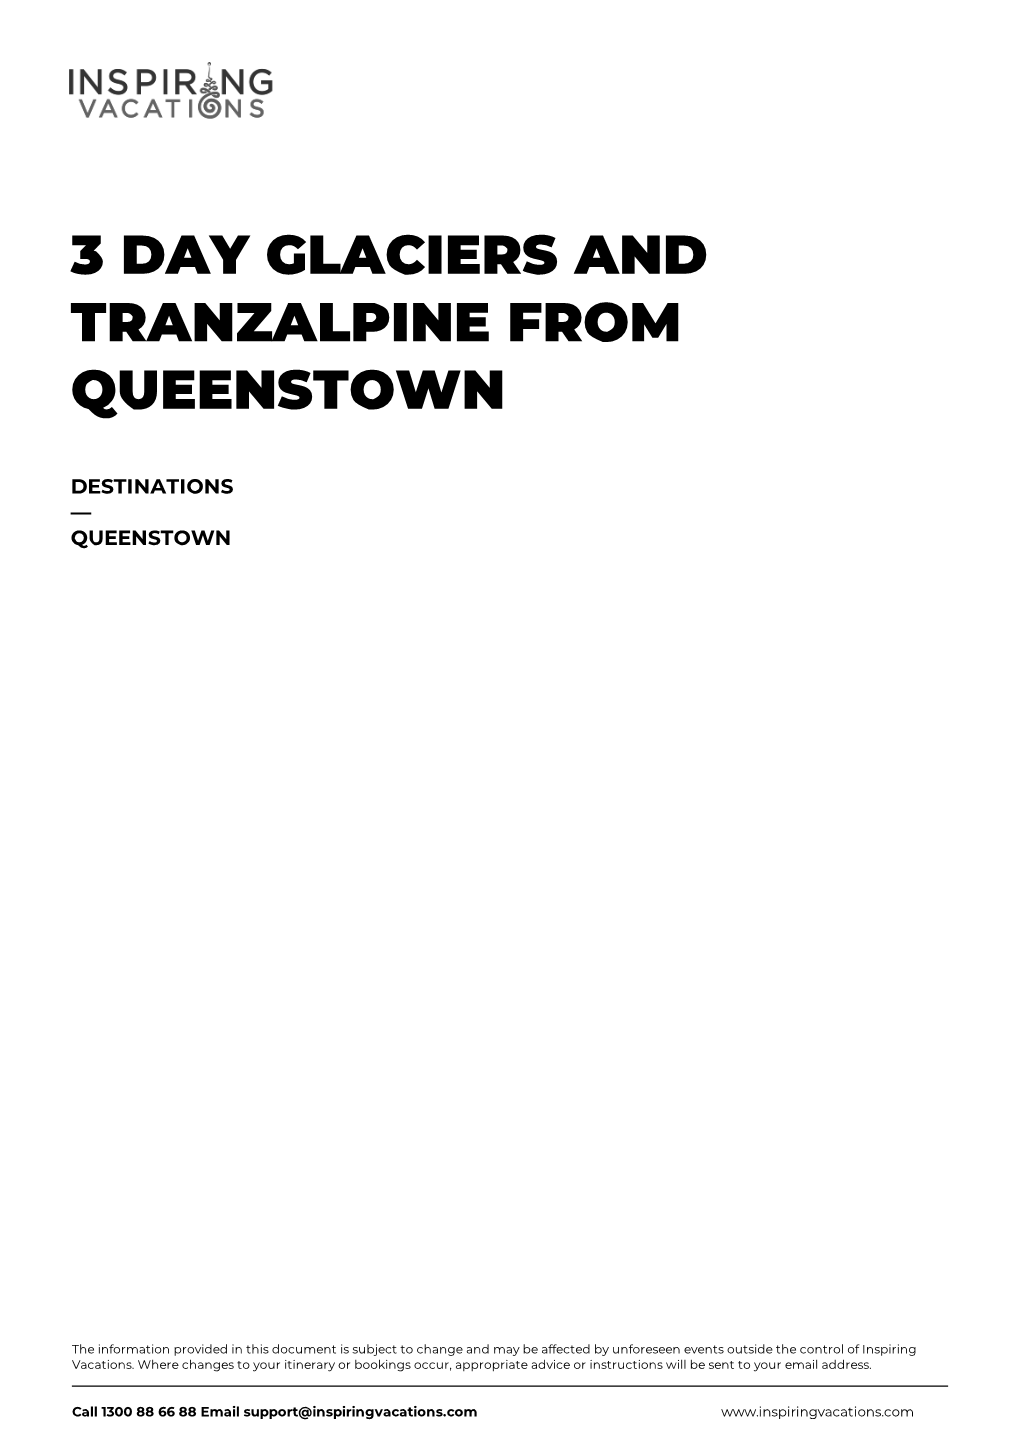 3 Day Glaciers and Tranzalpine from Queenstown